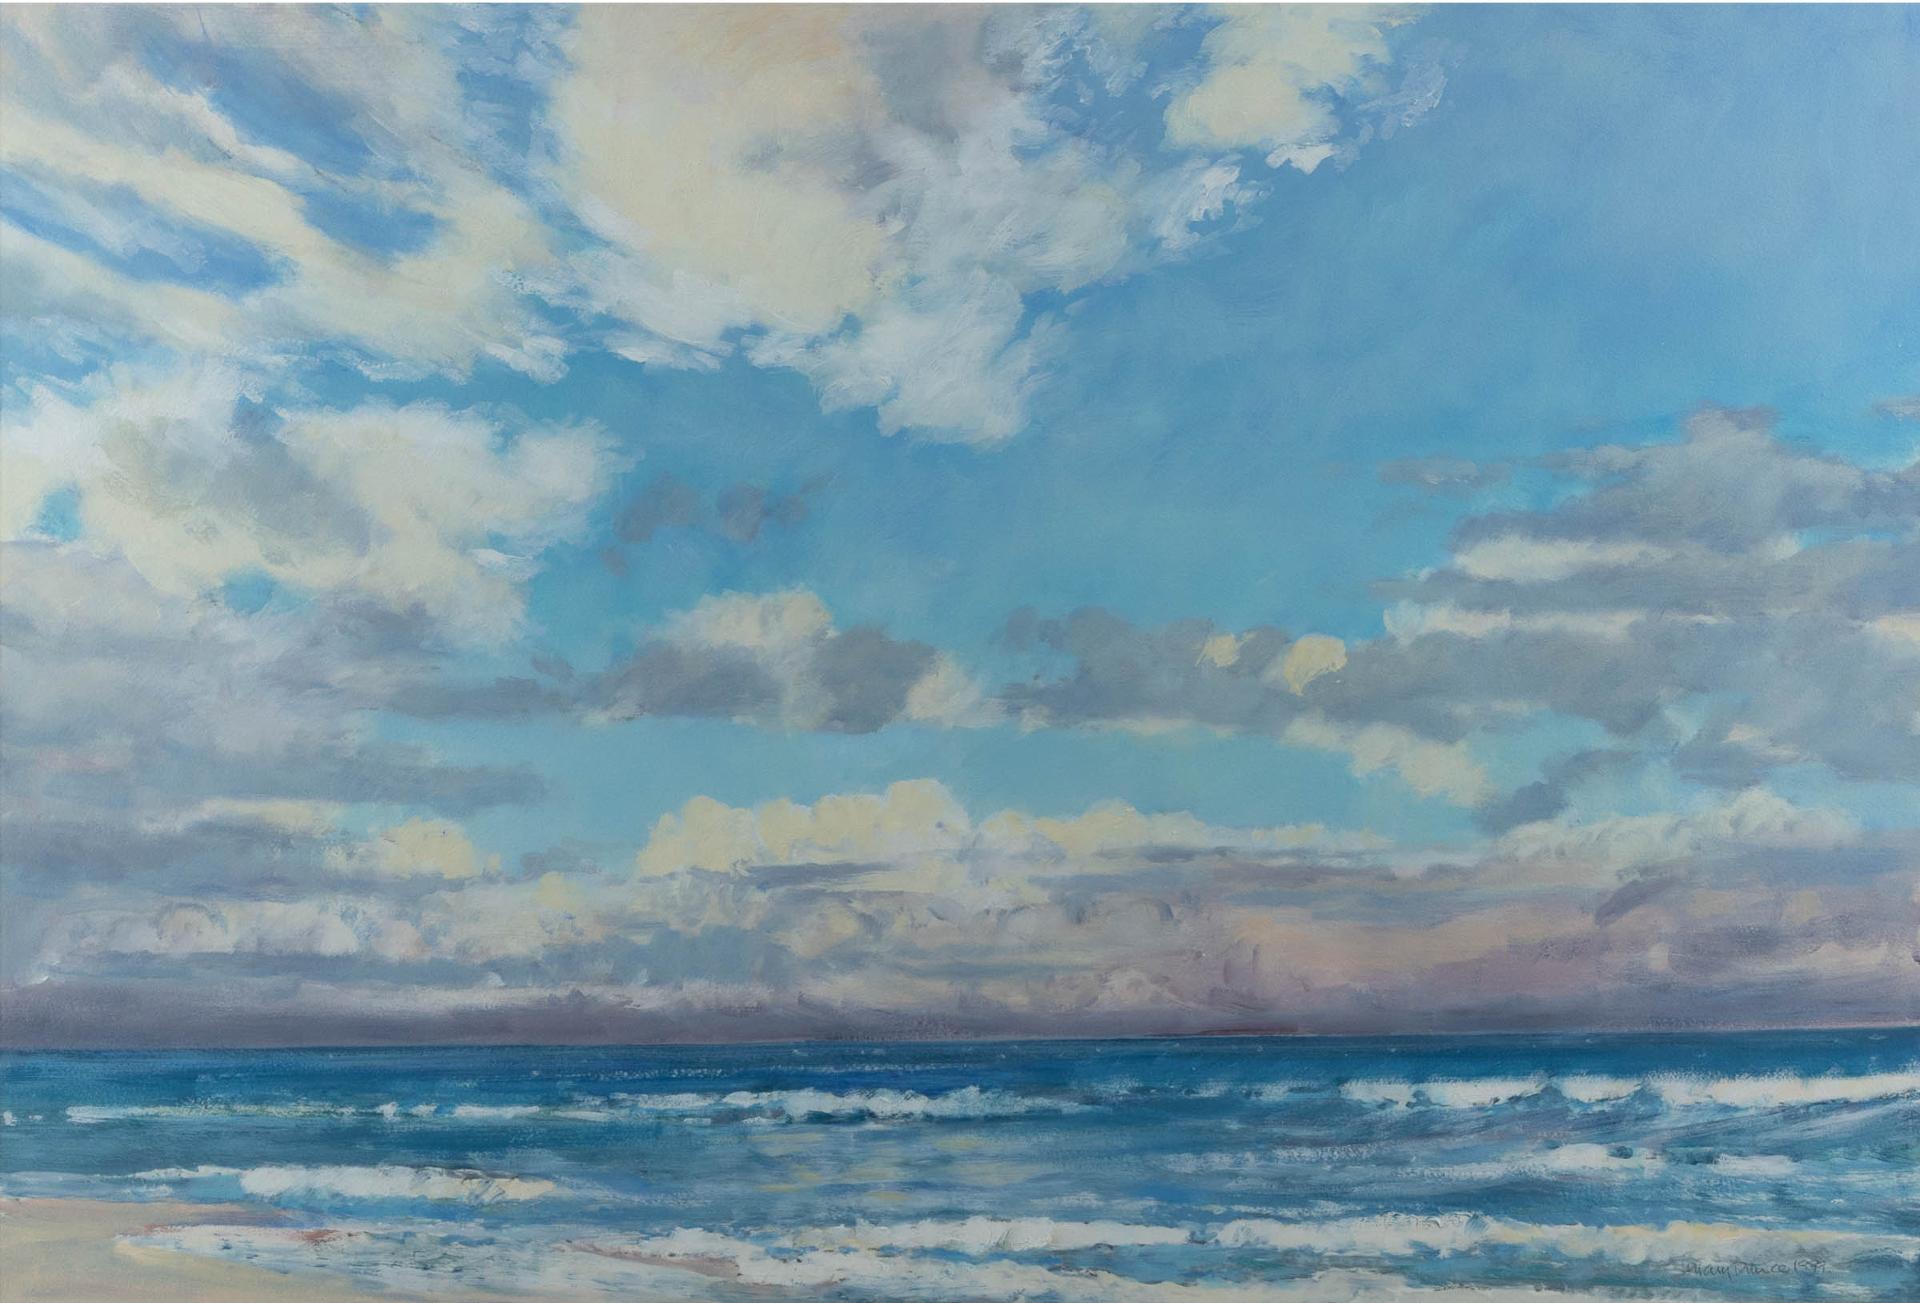 Hilary Prince (1945) - Clouds Out To The Sea, 1999